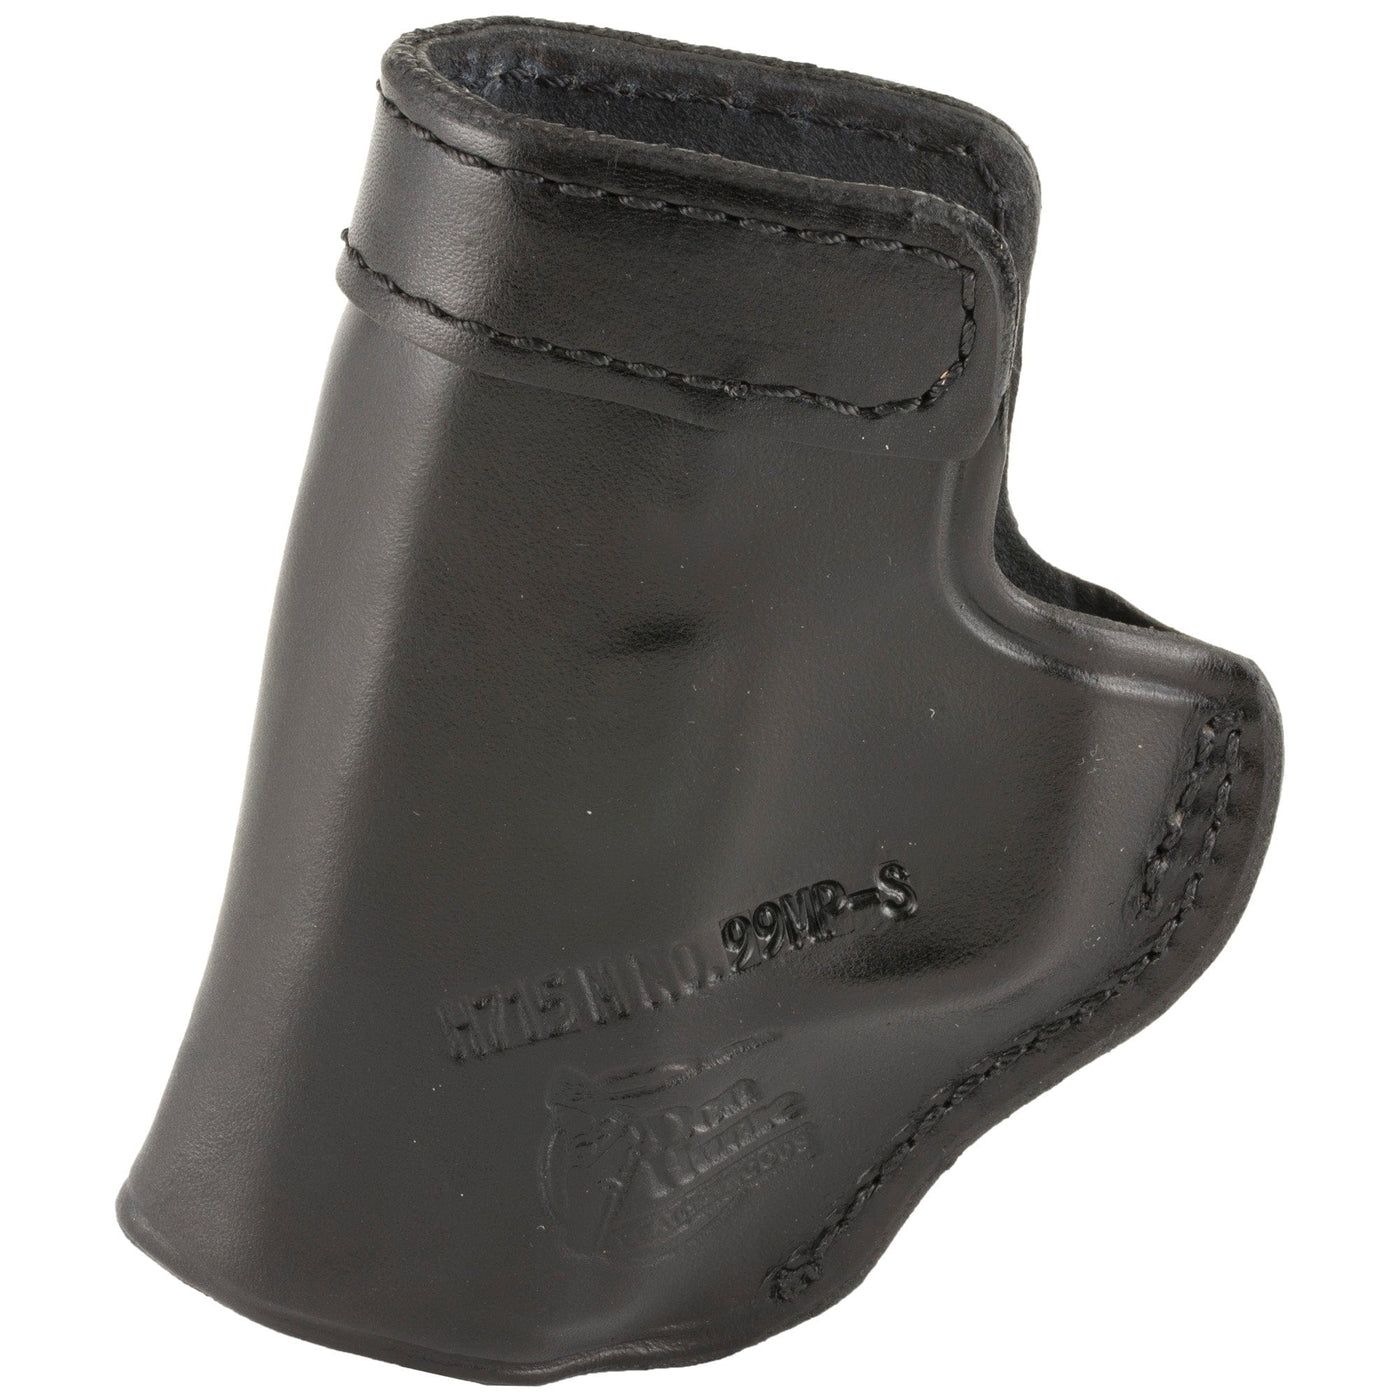 Don Hume D Hume H715-m Sw Shield Black / Right Hand Holsters